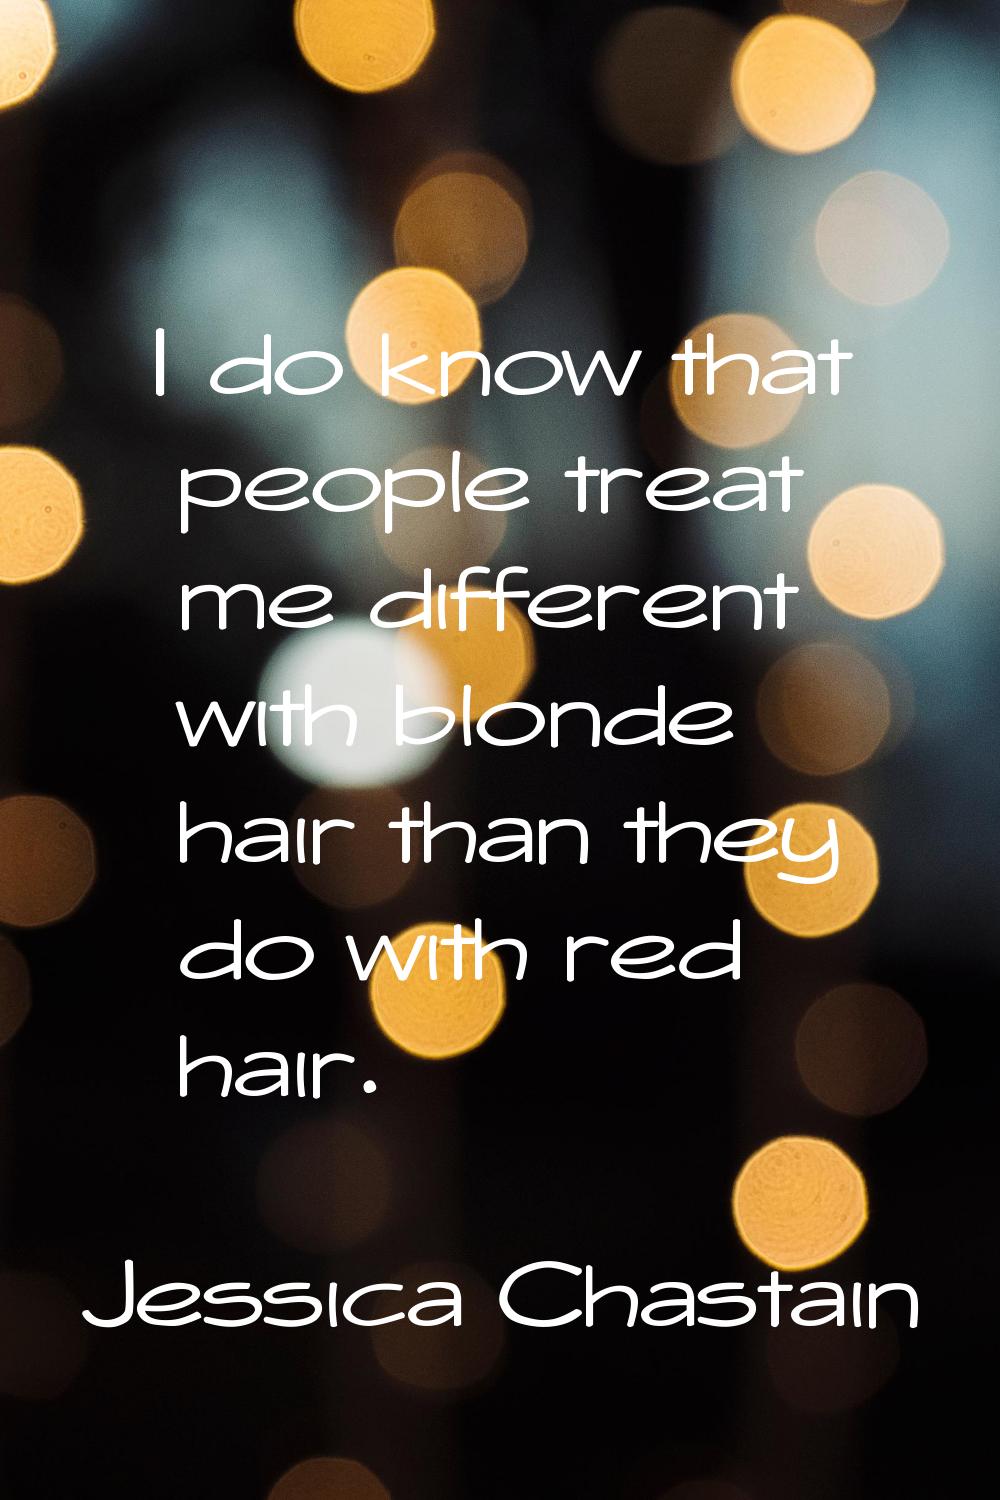 I do know that people treat me different with blonde hair than they do with red hair.